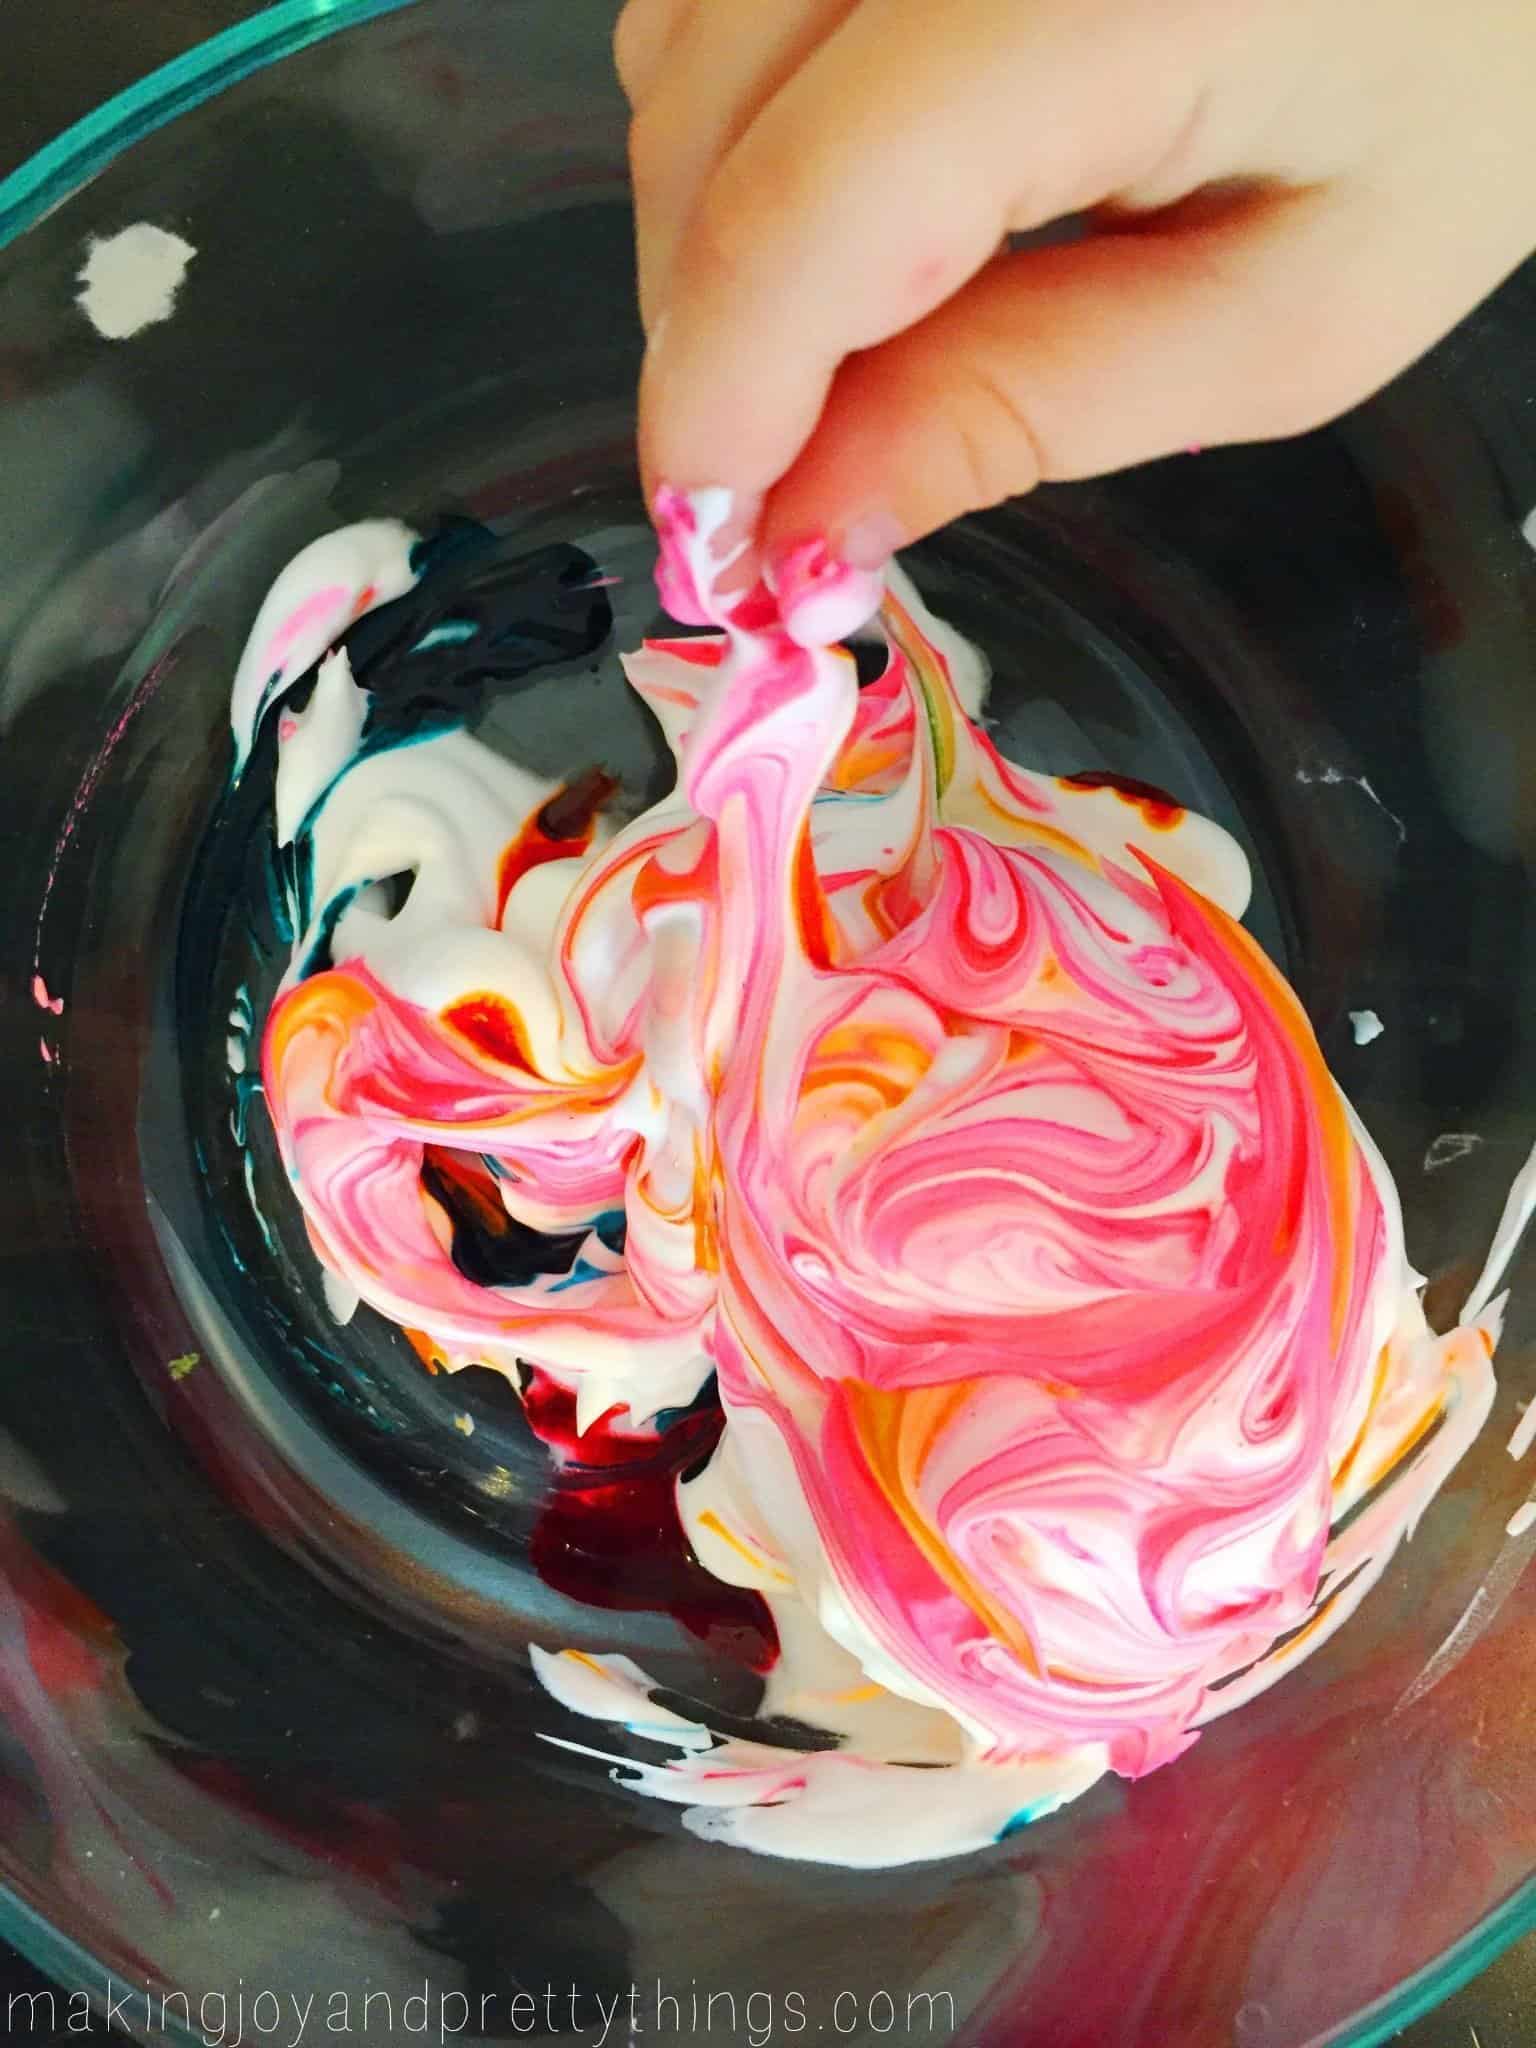 A little boy's hand uses a stick to swirl around pink and orange food coloring into a pile of white shaving cream in a glass bowl.